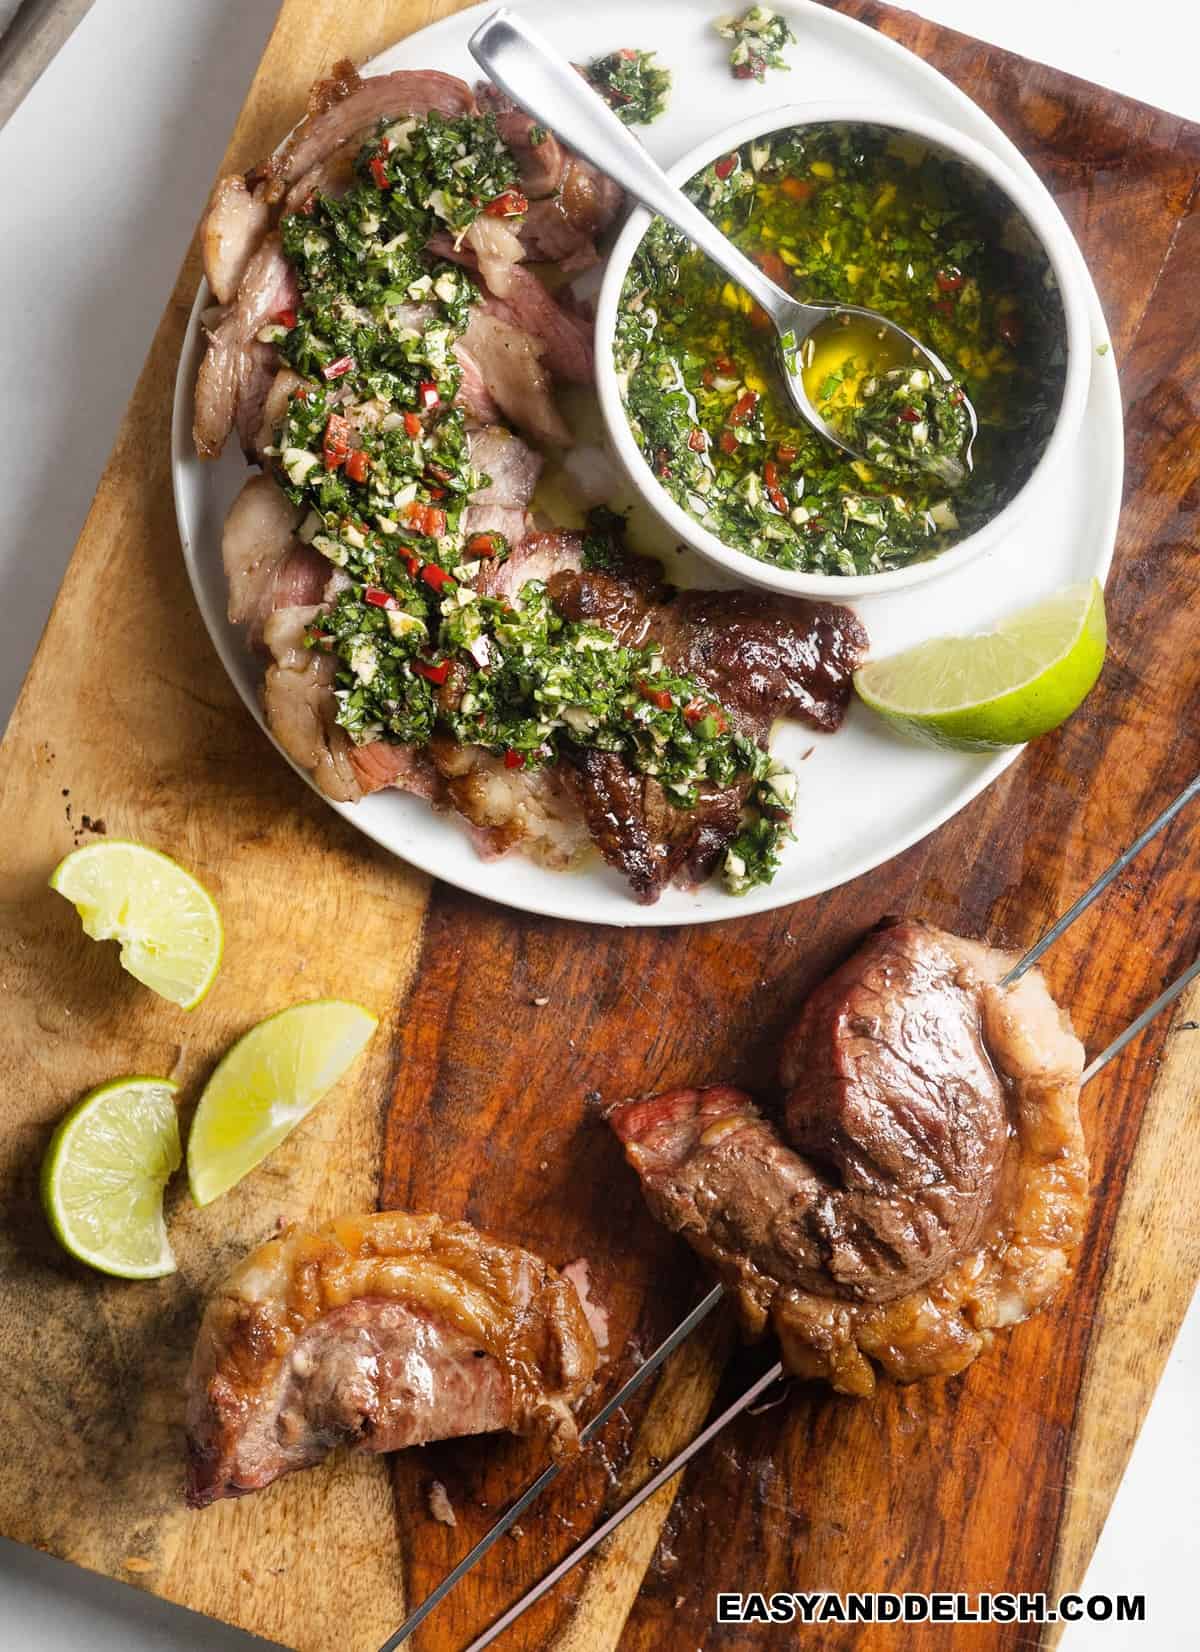 whole and sliced grilled picanha steak topped with chimichurri sauce.